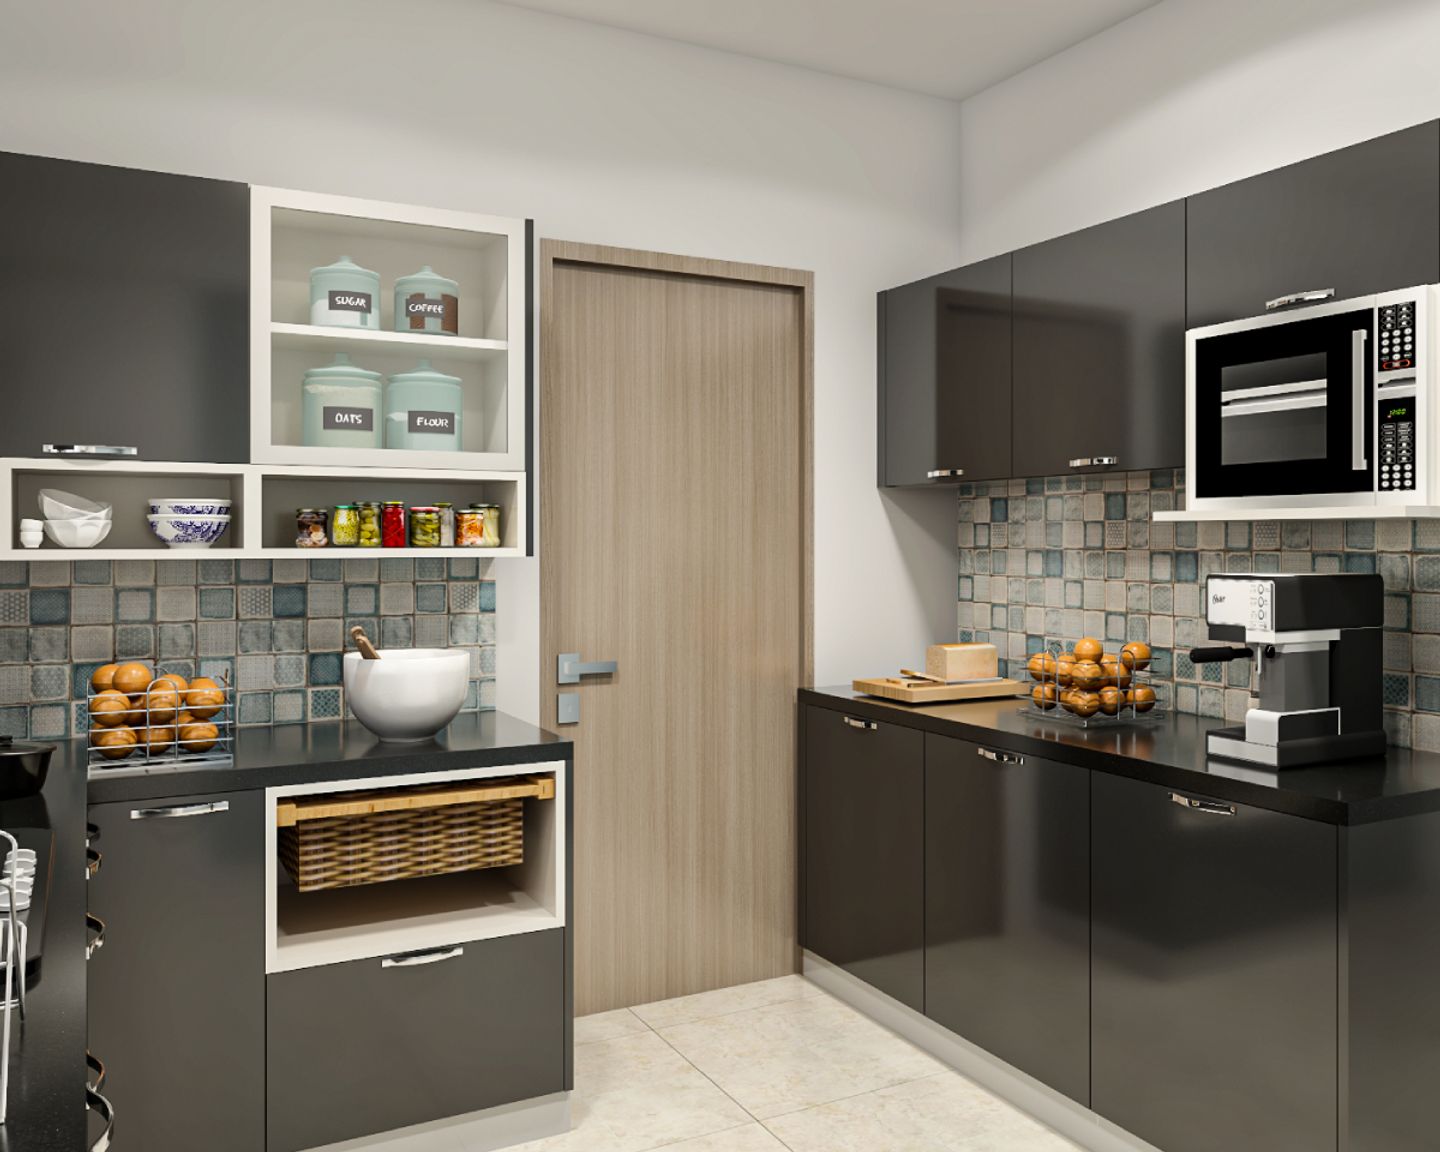 Modern L-Shaped Kitchen Design With Open And Closed Storage Options